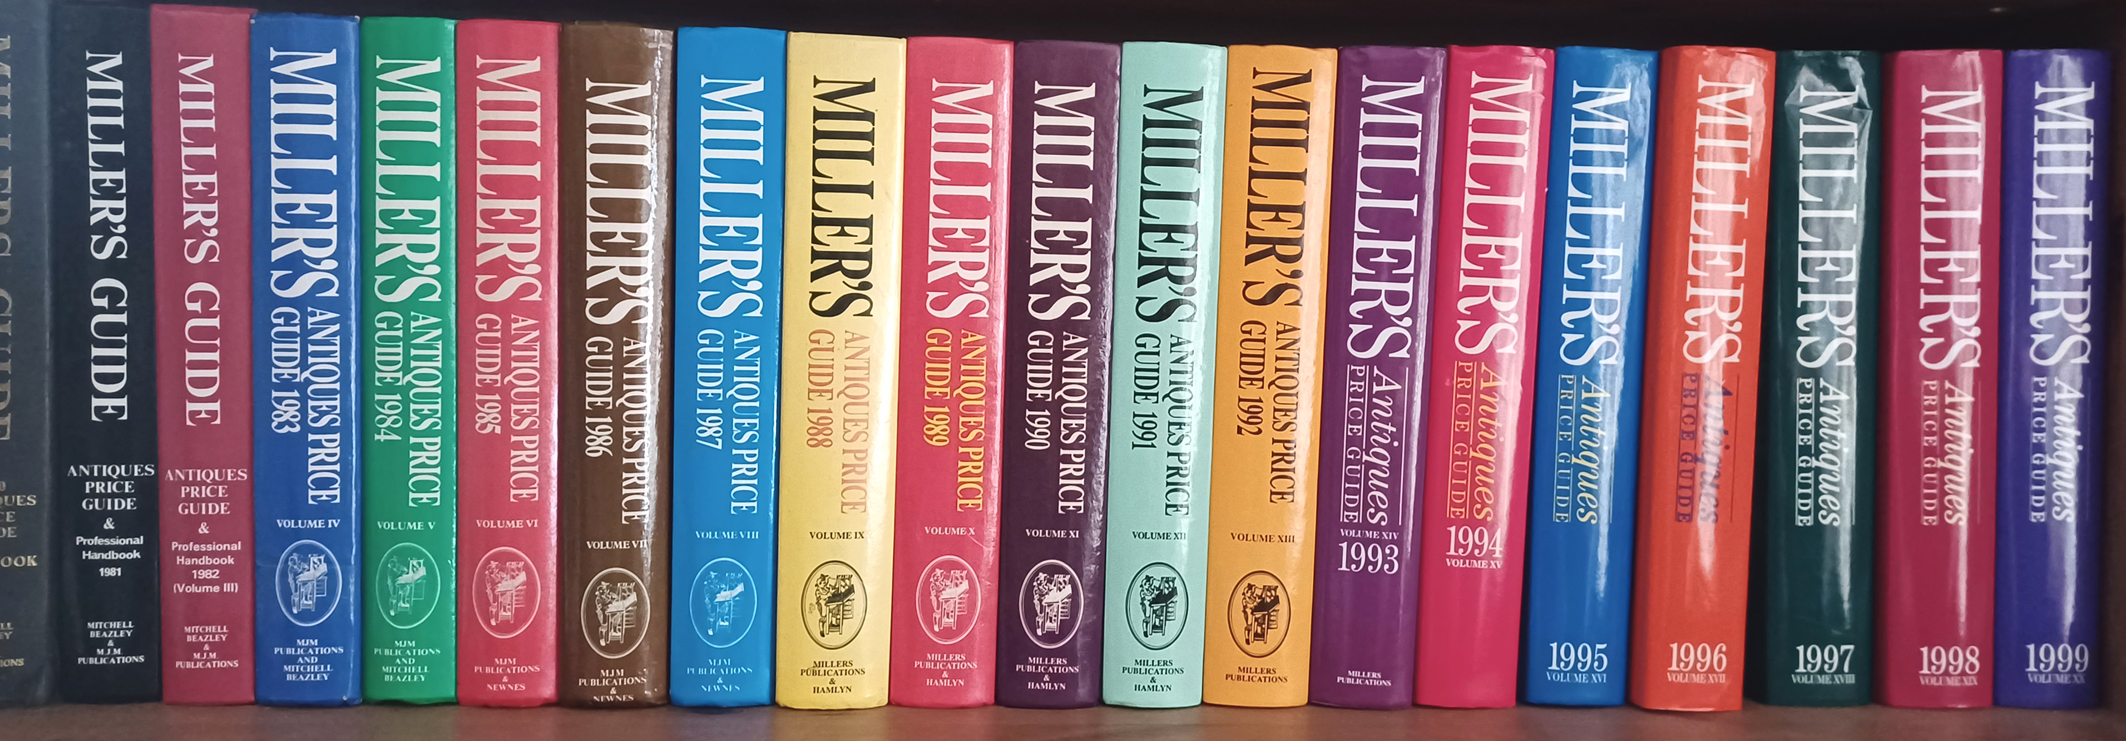 MILLERS GUIDE FROM 1980 TO 1999 ANTIQUES REFERENCE PRICE BOOKS